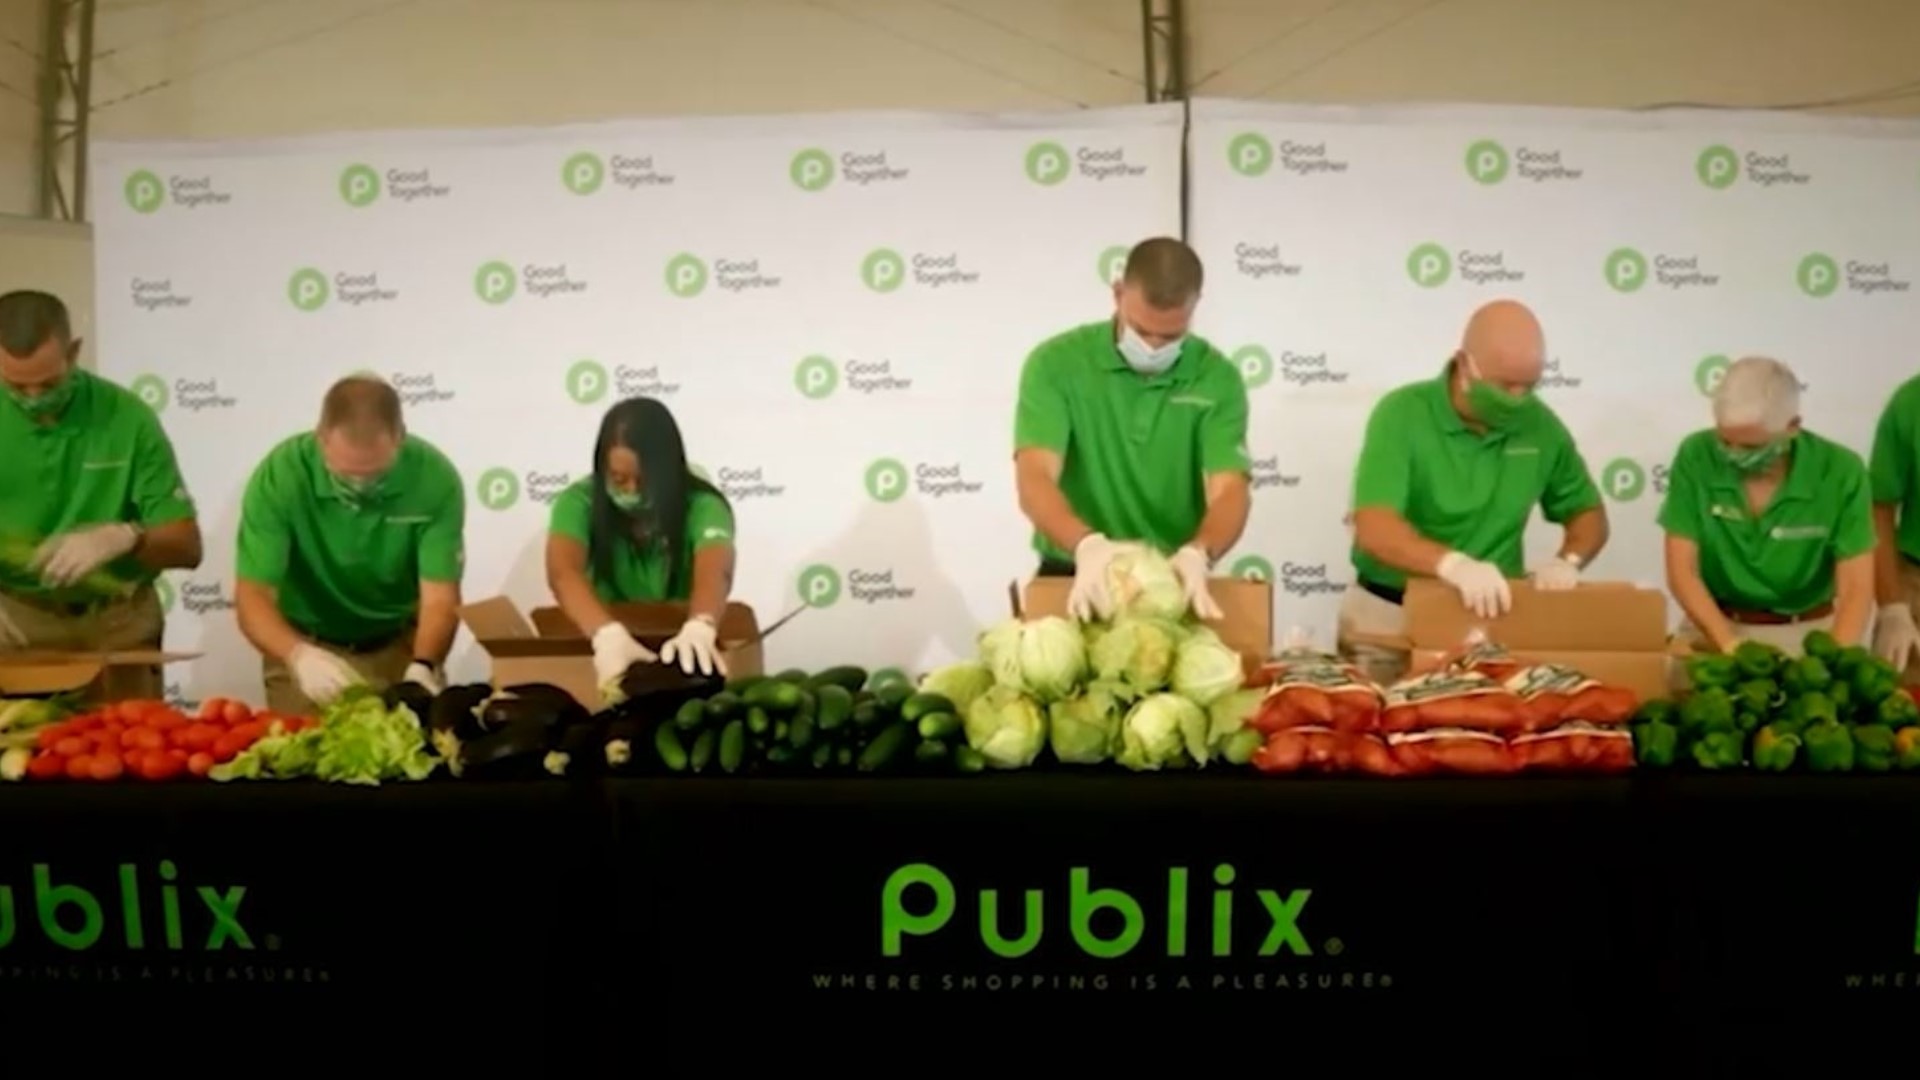 Donate to Feeding More Together at any Publix through Nov. 20, 2022 and help alleviate hunger in the Tennessee Valley.